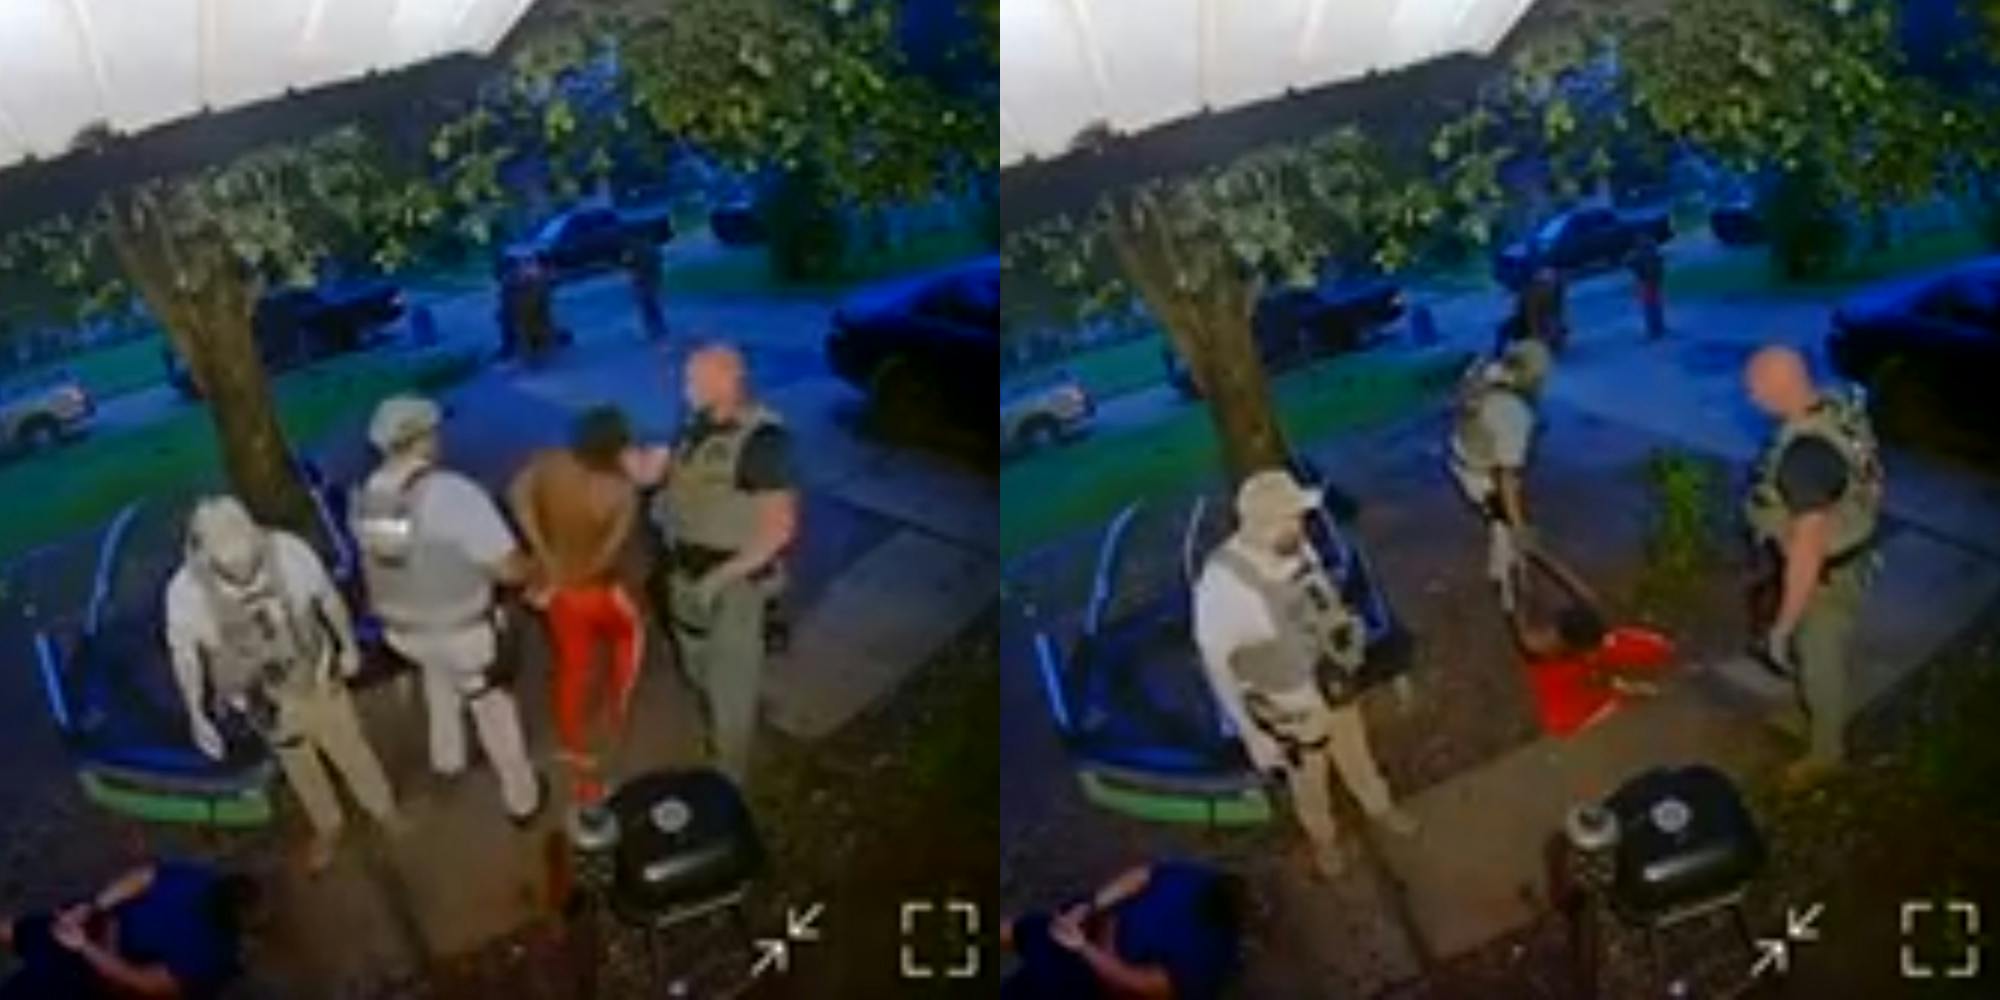 Video Shows U.S. Marshal Hitting Handcuffed Black Man in the Face in Mississippi